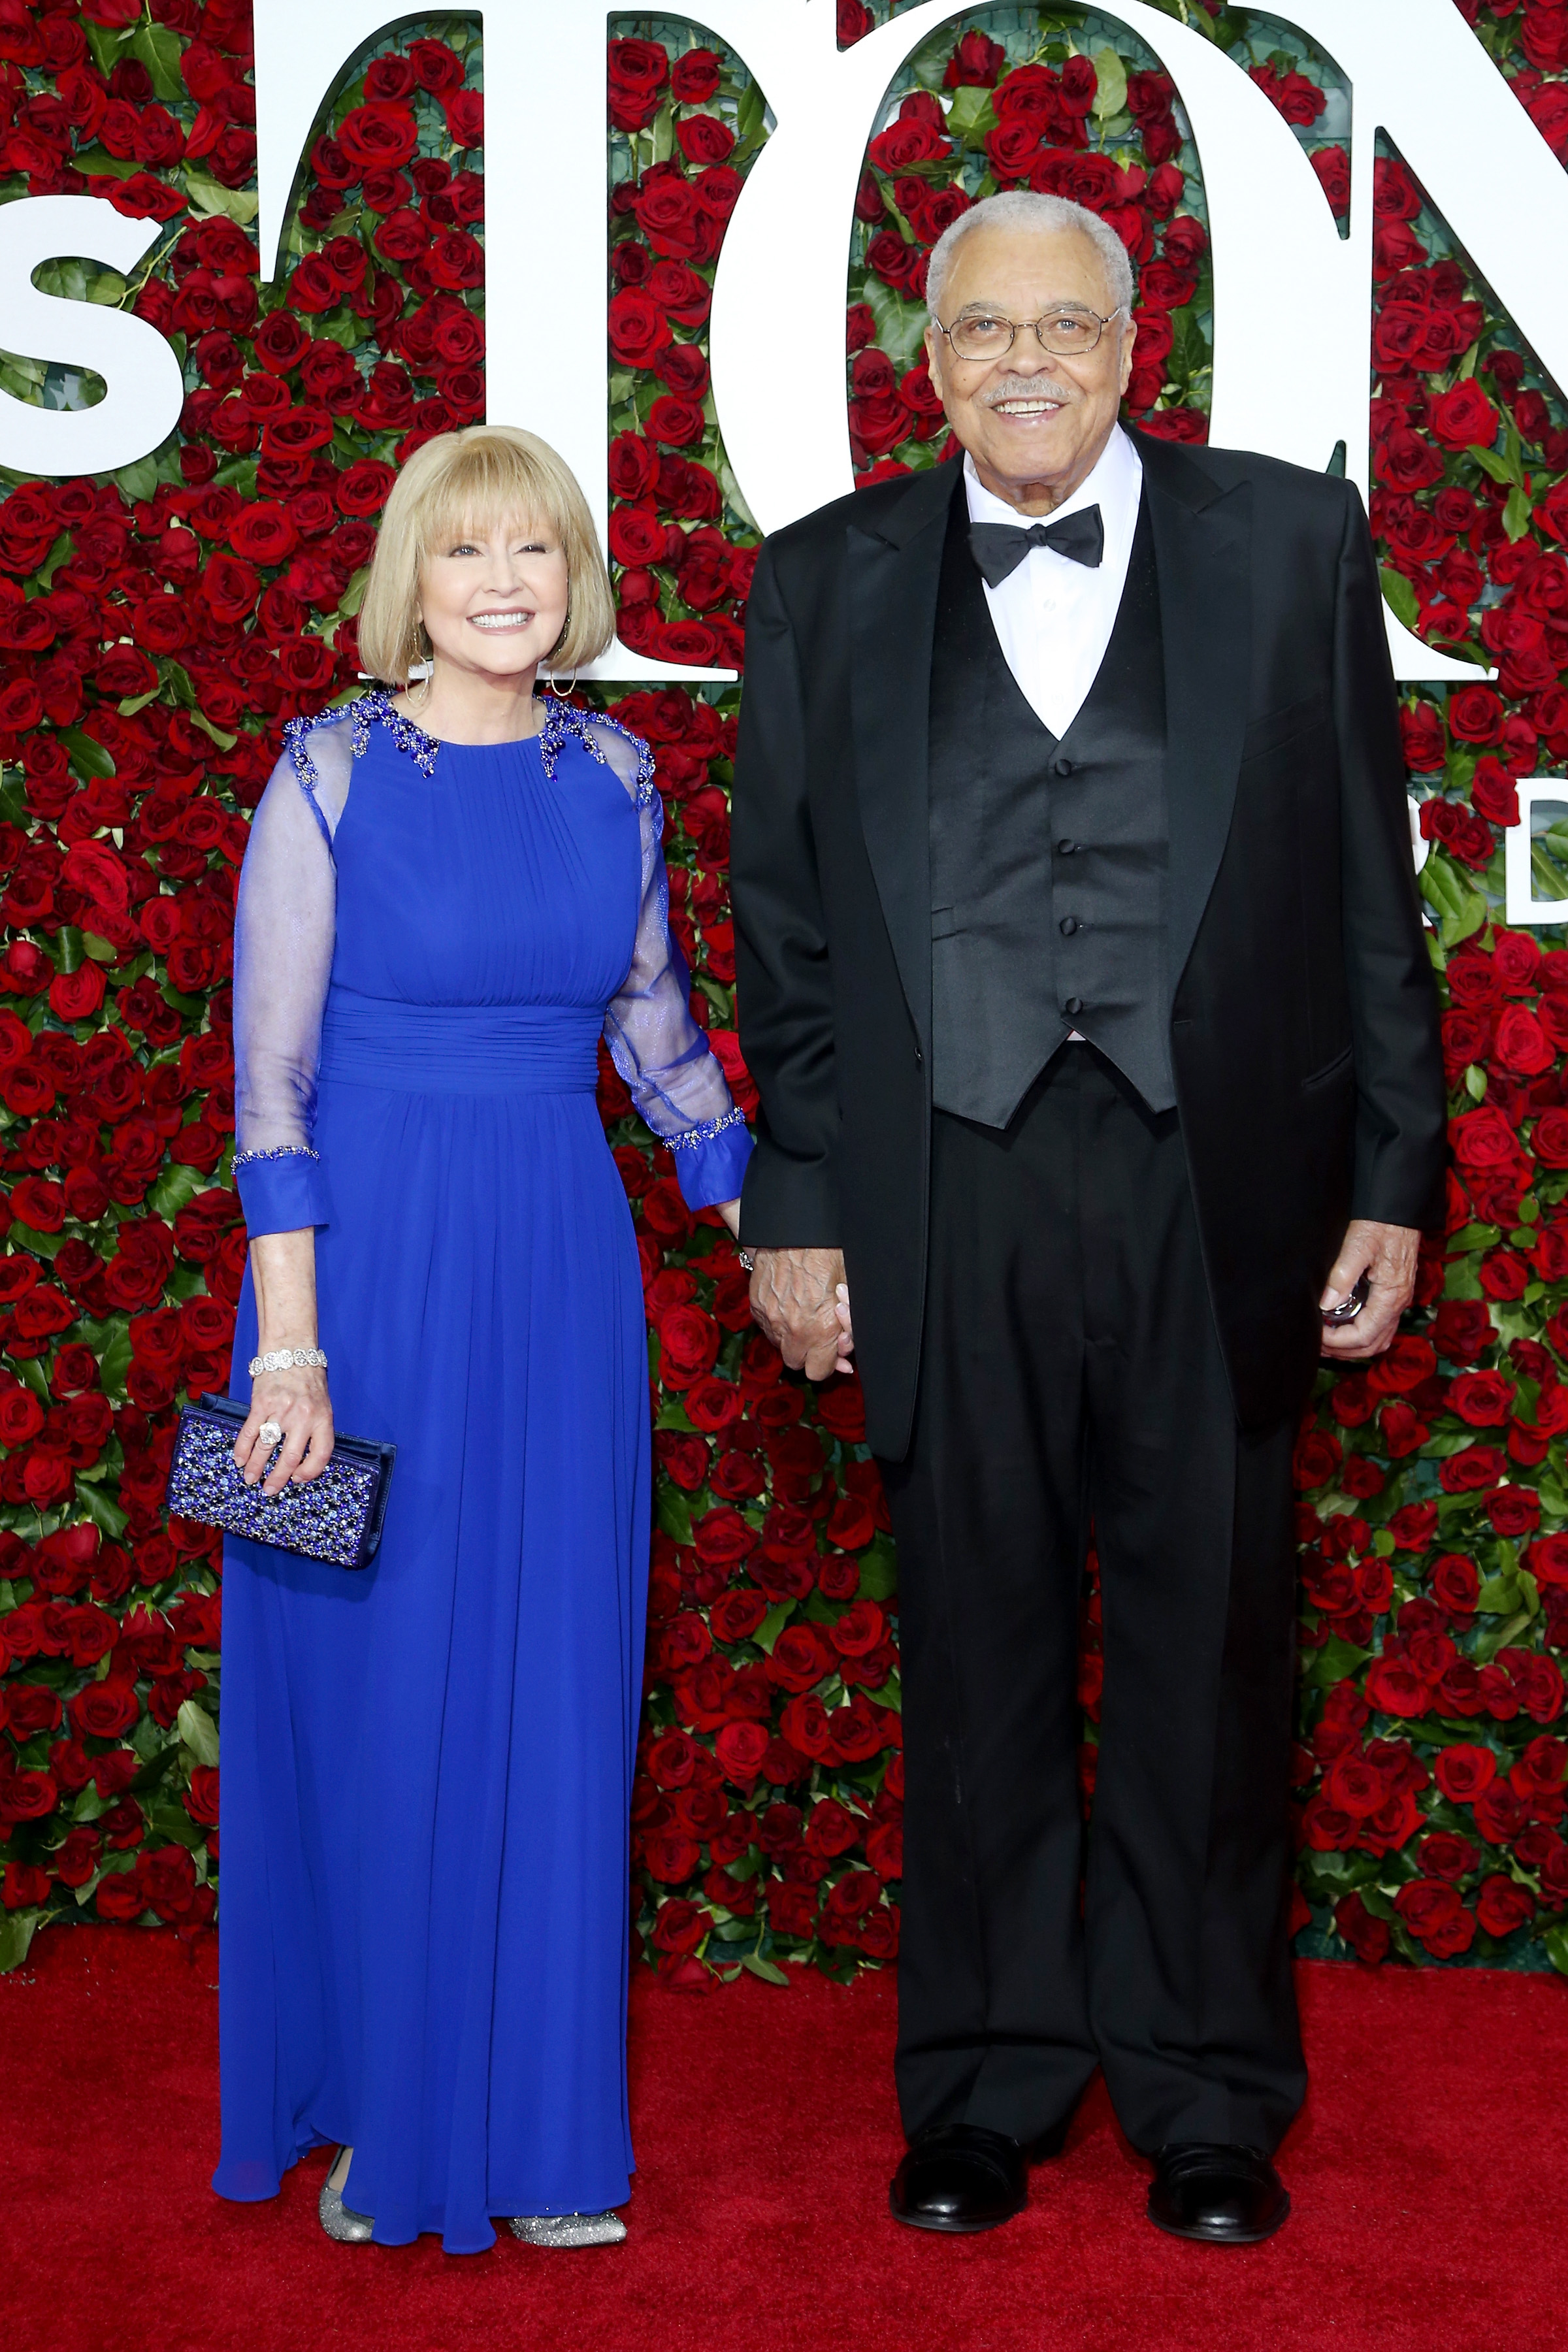 Cecilia Hart and James Earl Jones attend the 2016 Tony Awards - Red Carpet at The Beacon Theatre on June 12, 2016, in New York City. | Source: Getty Images